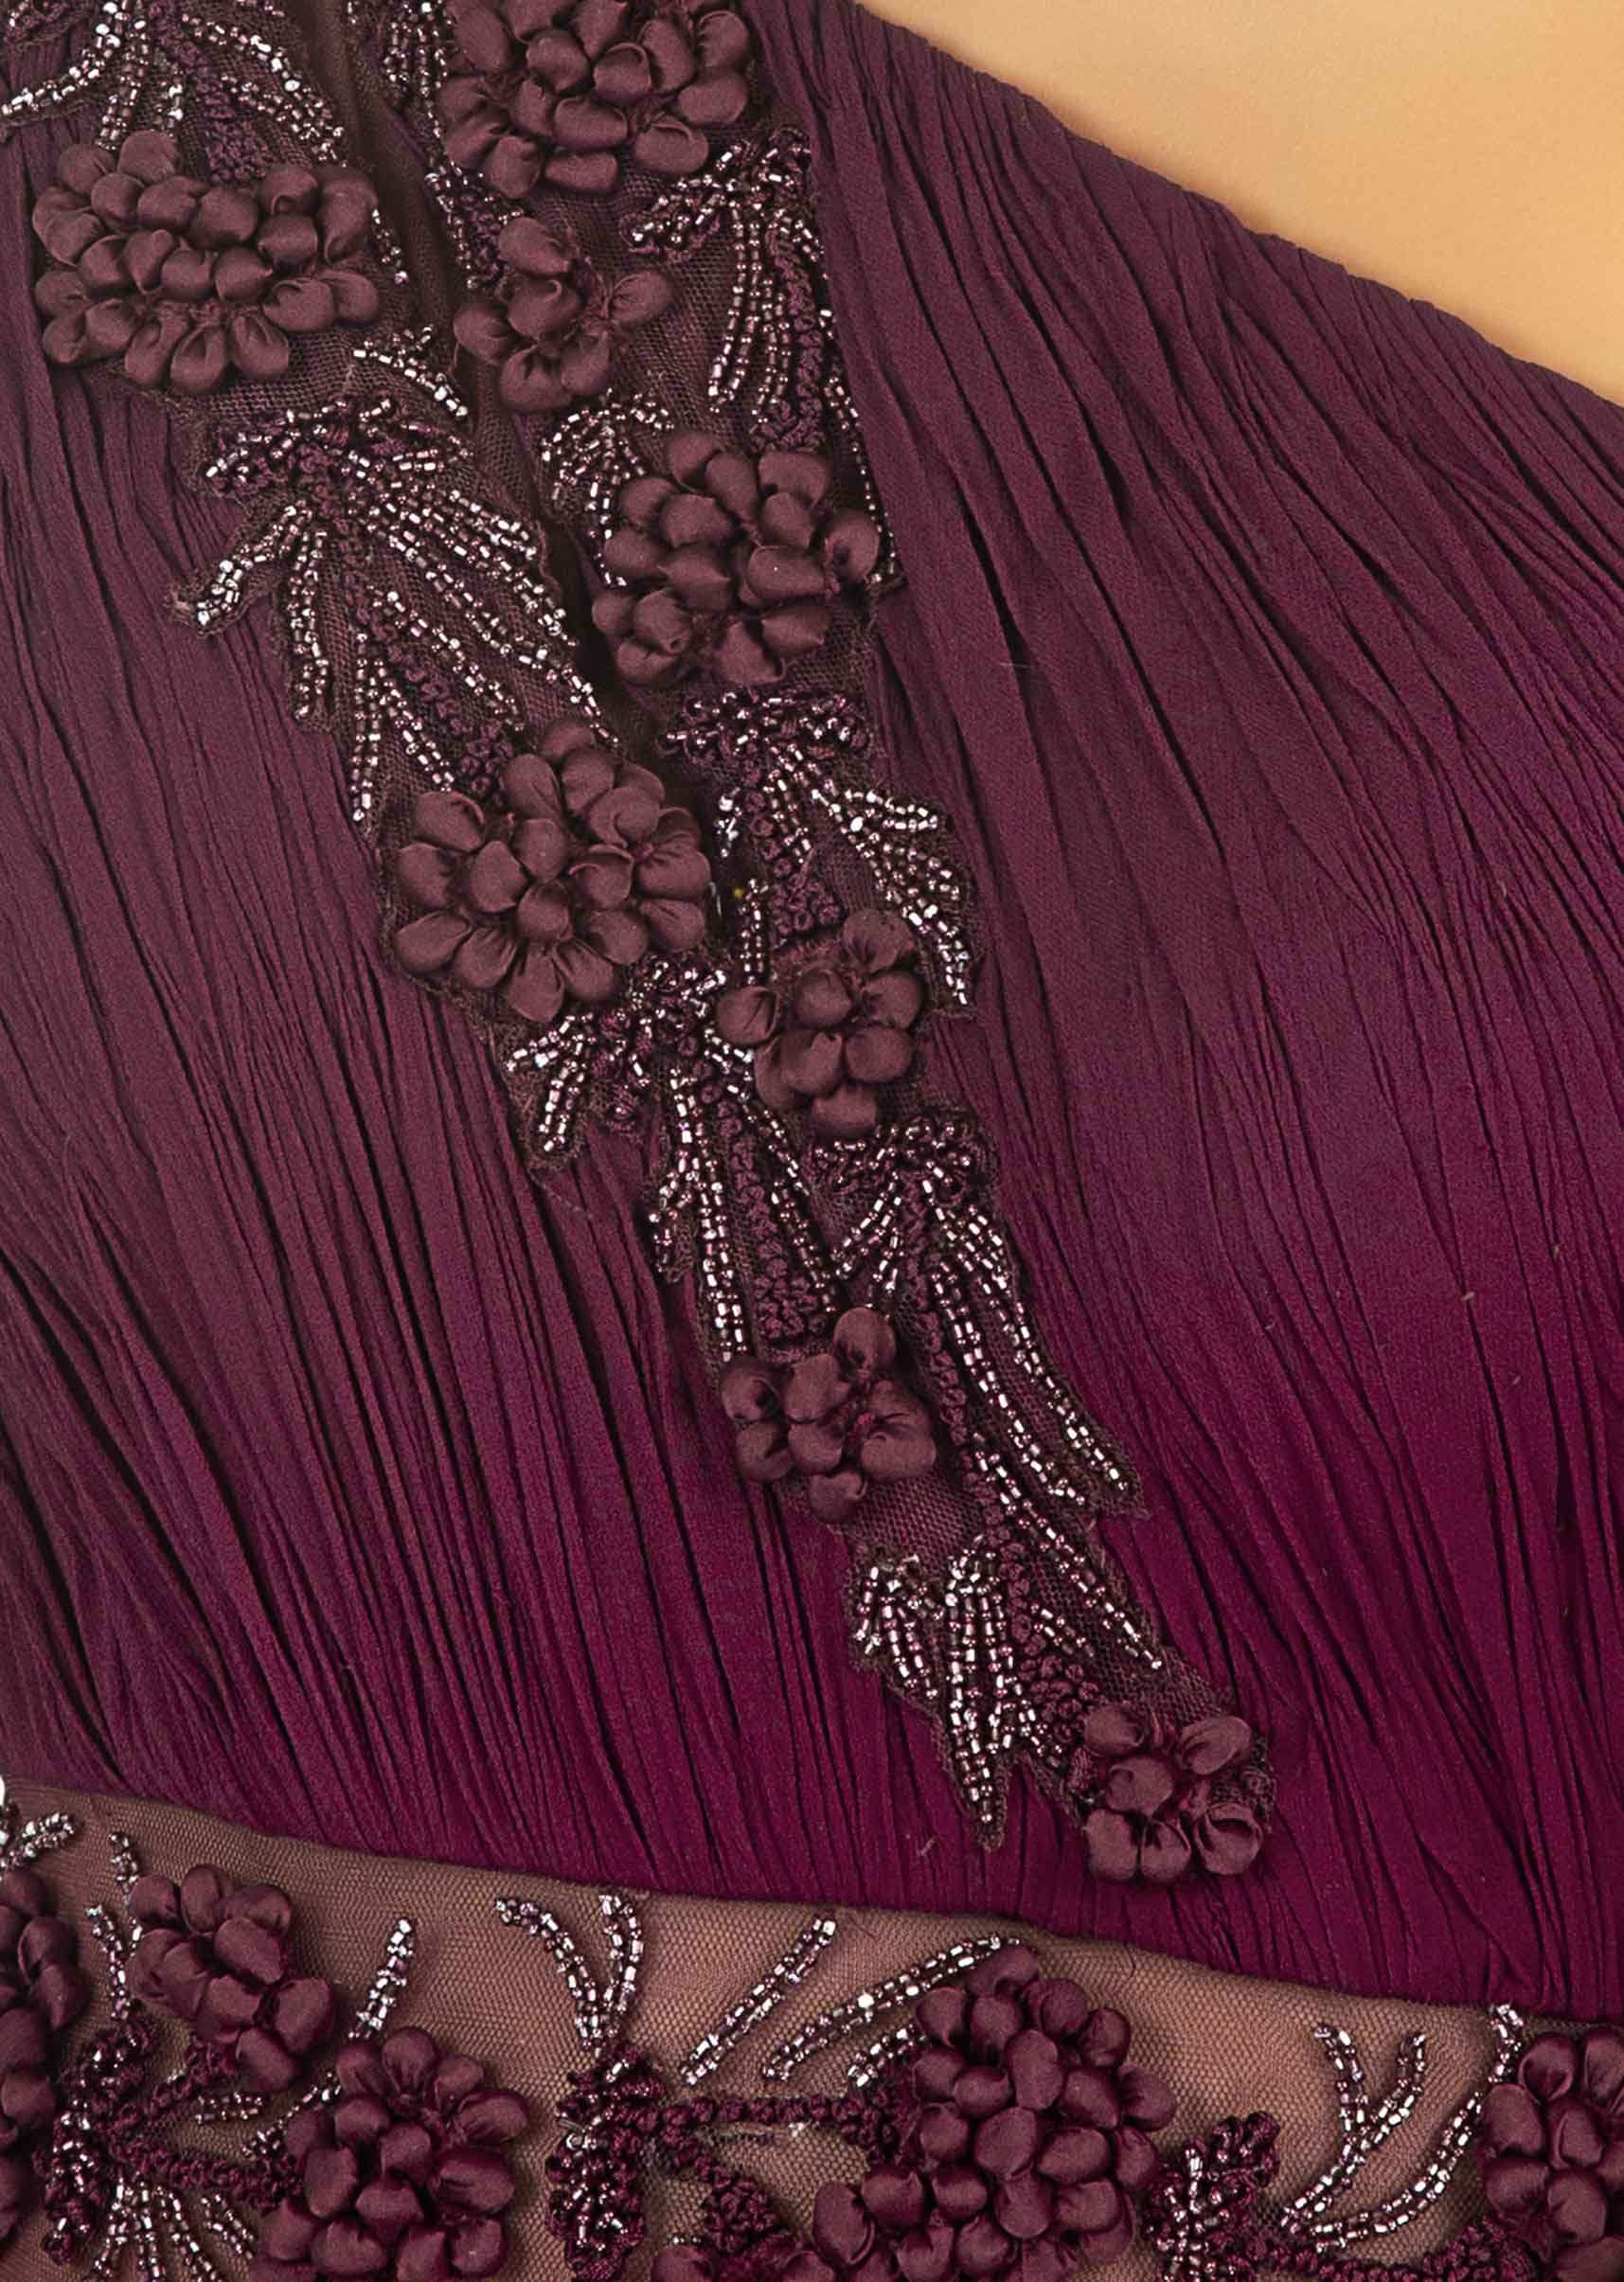 Maroon one shoulder satin gown with ruching bodice along with 3 D potli buttons